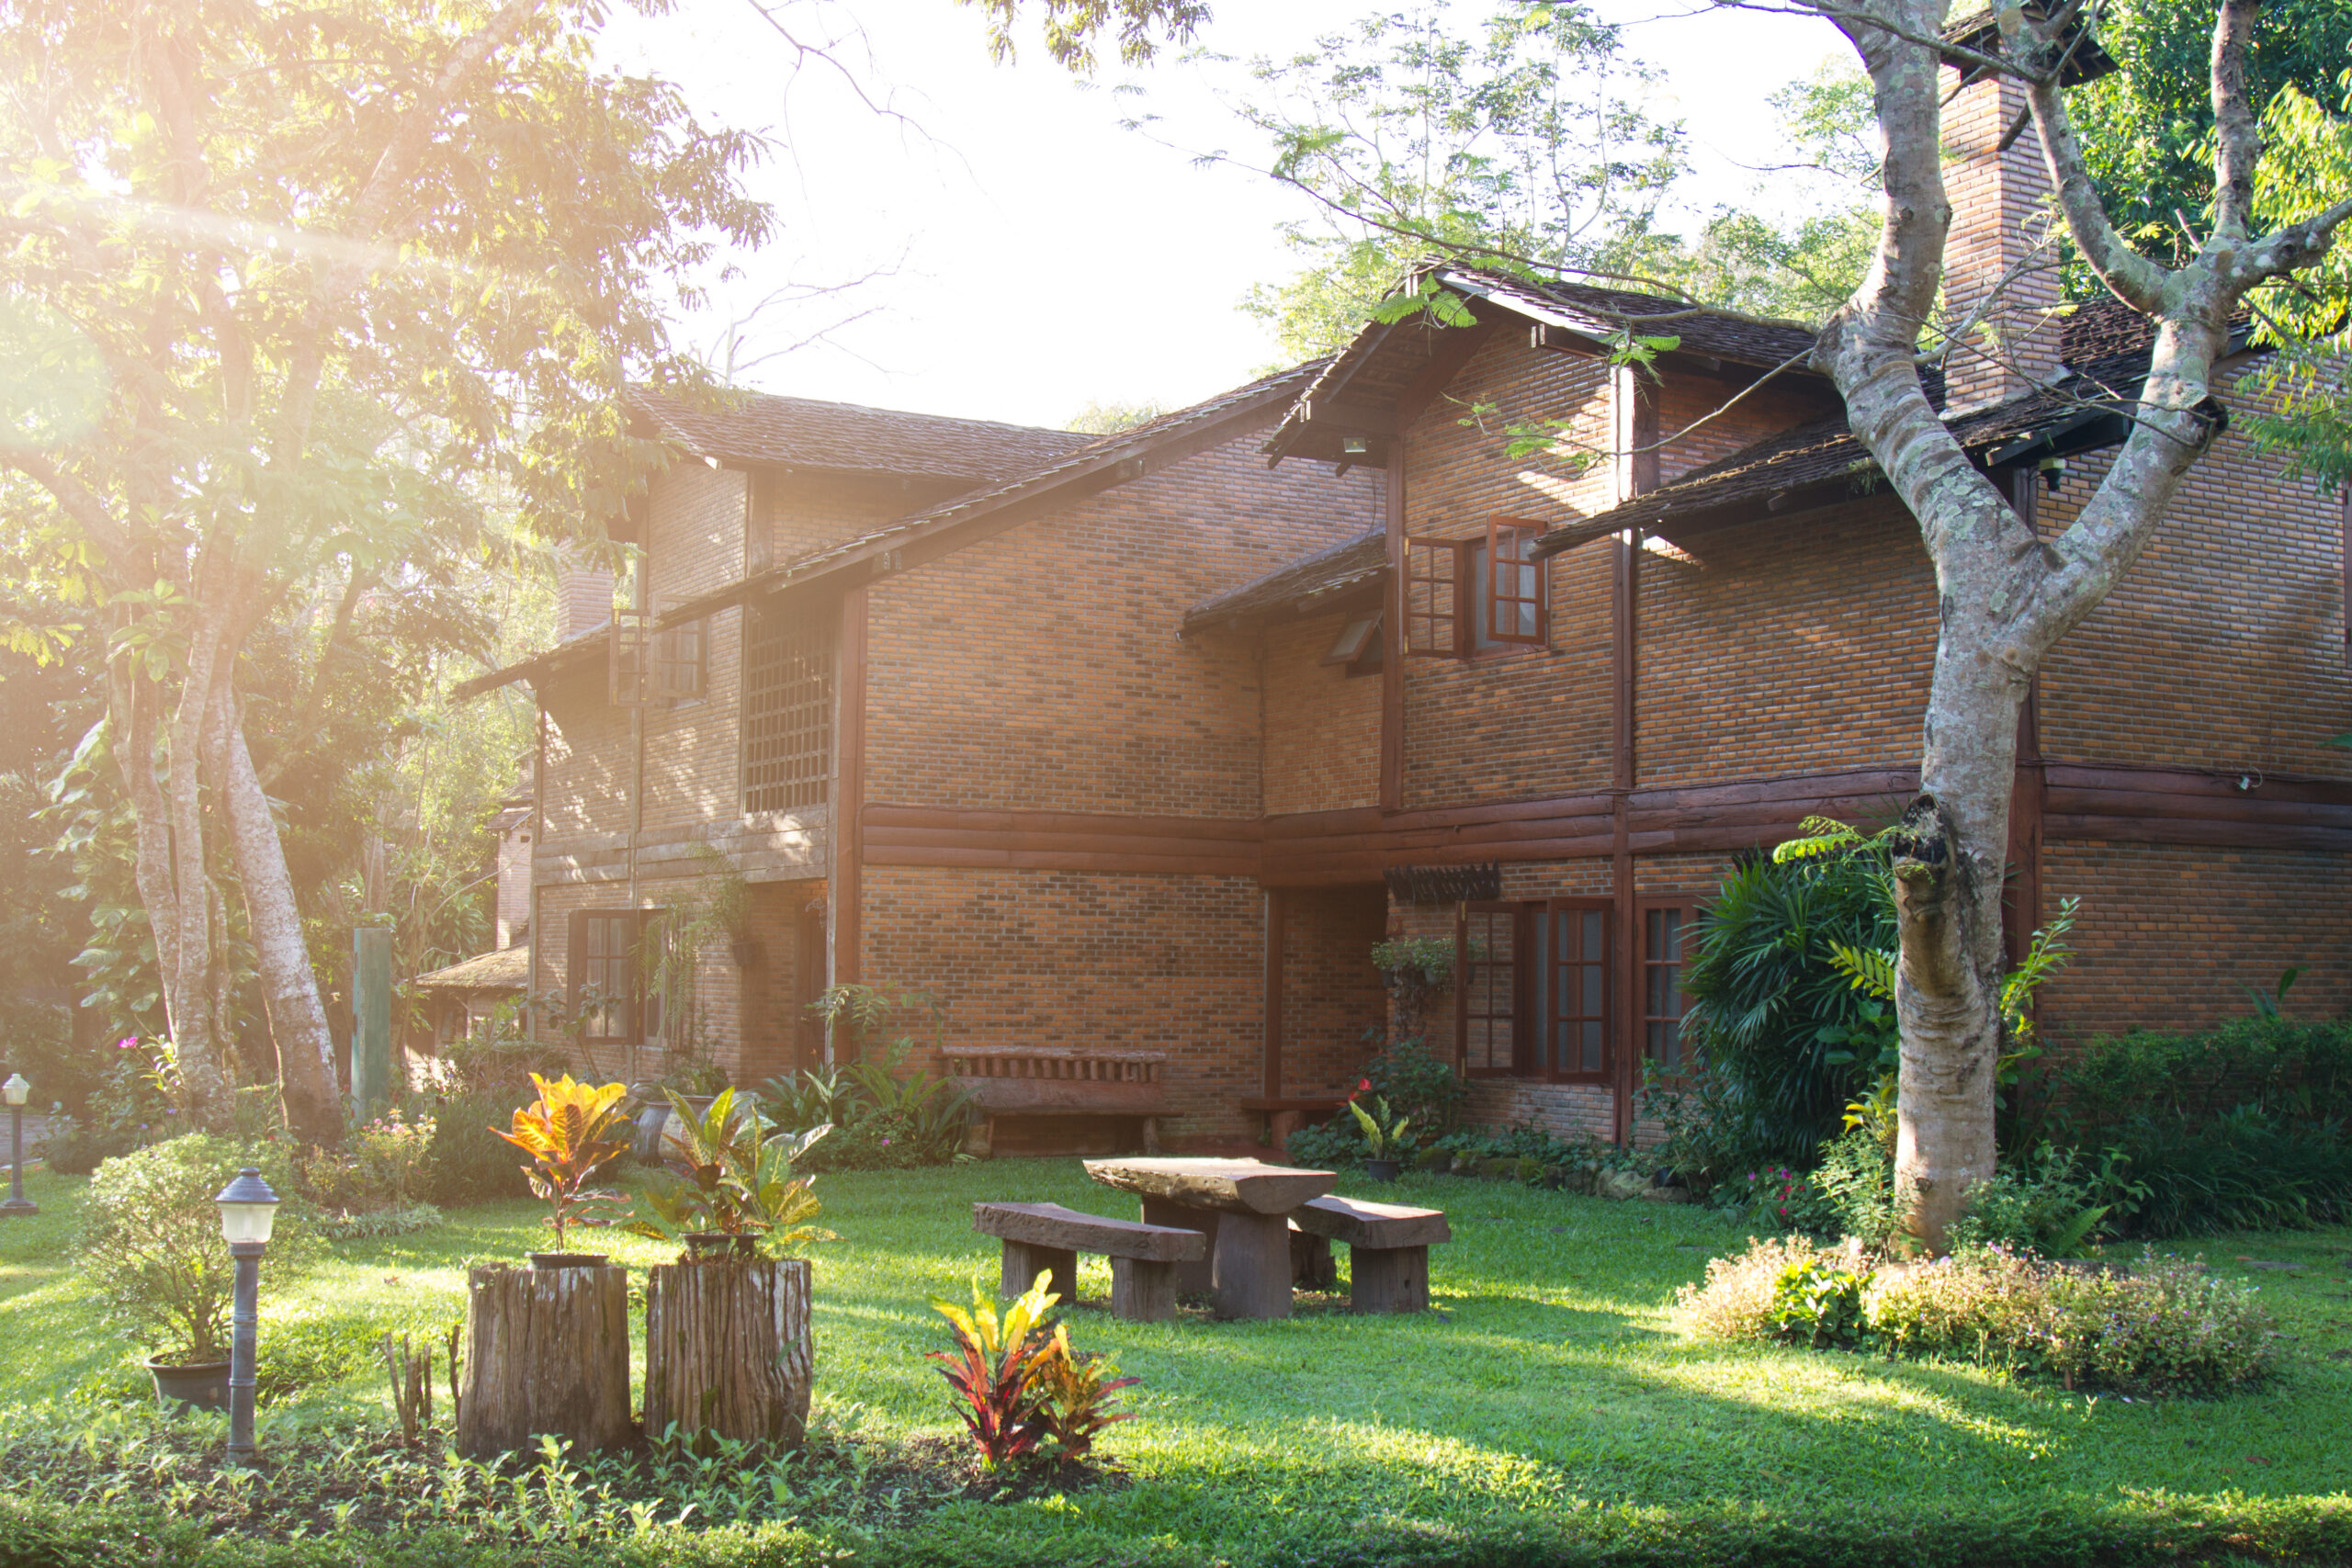 Wanderlust Lasting Bonds Through Extended Homestay Experiences